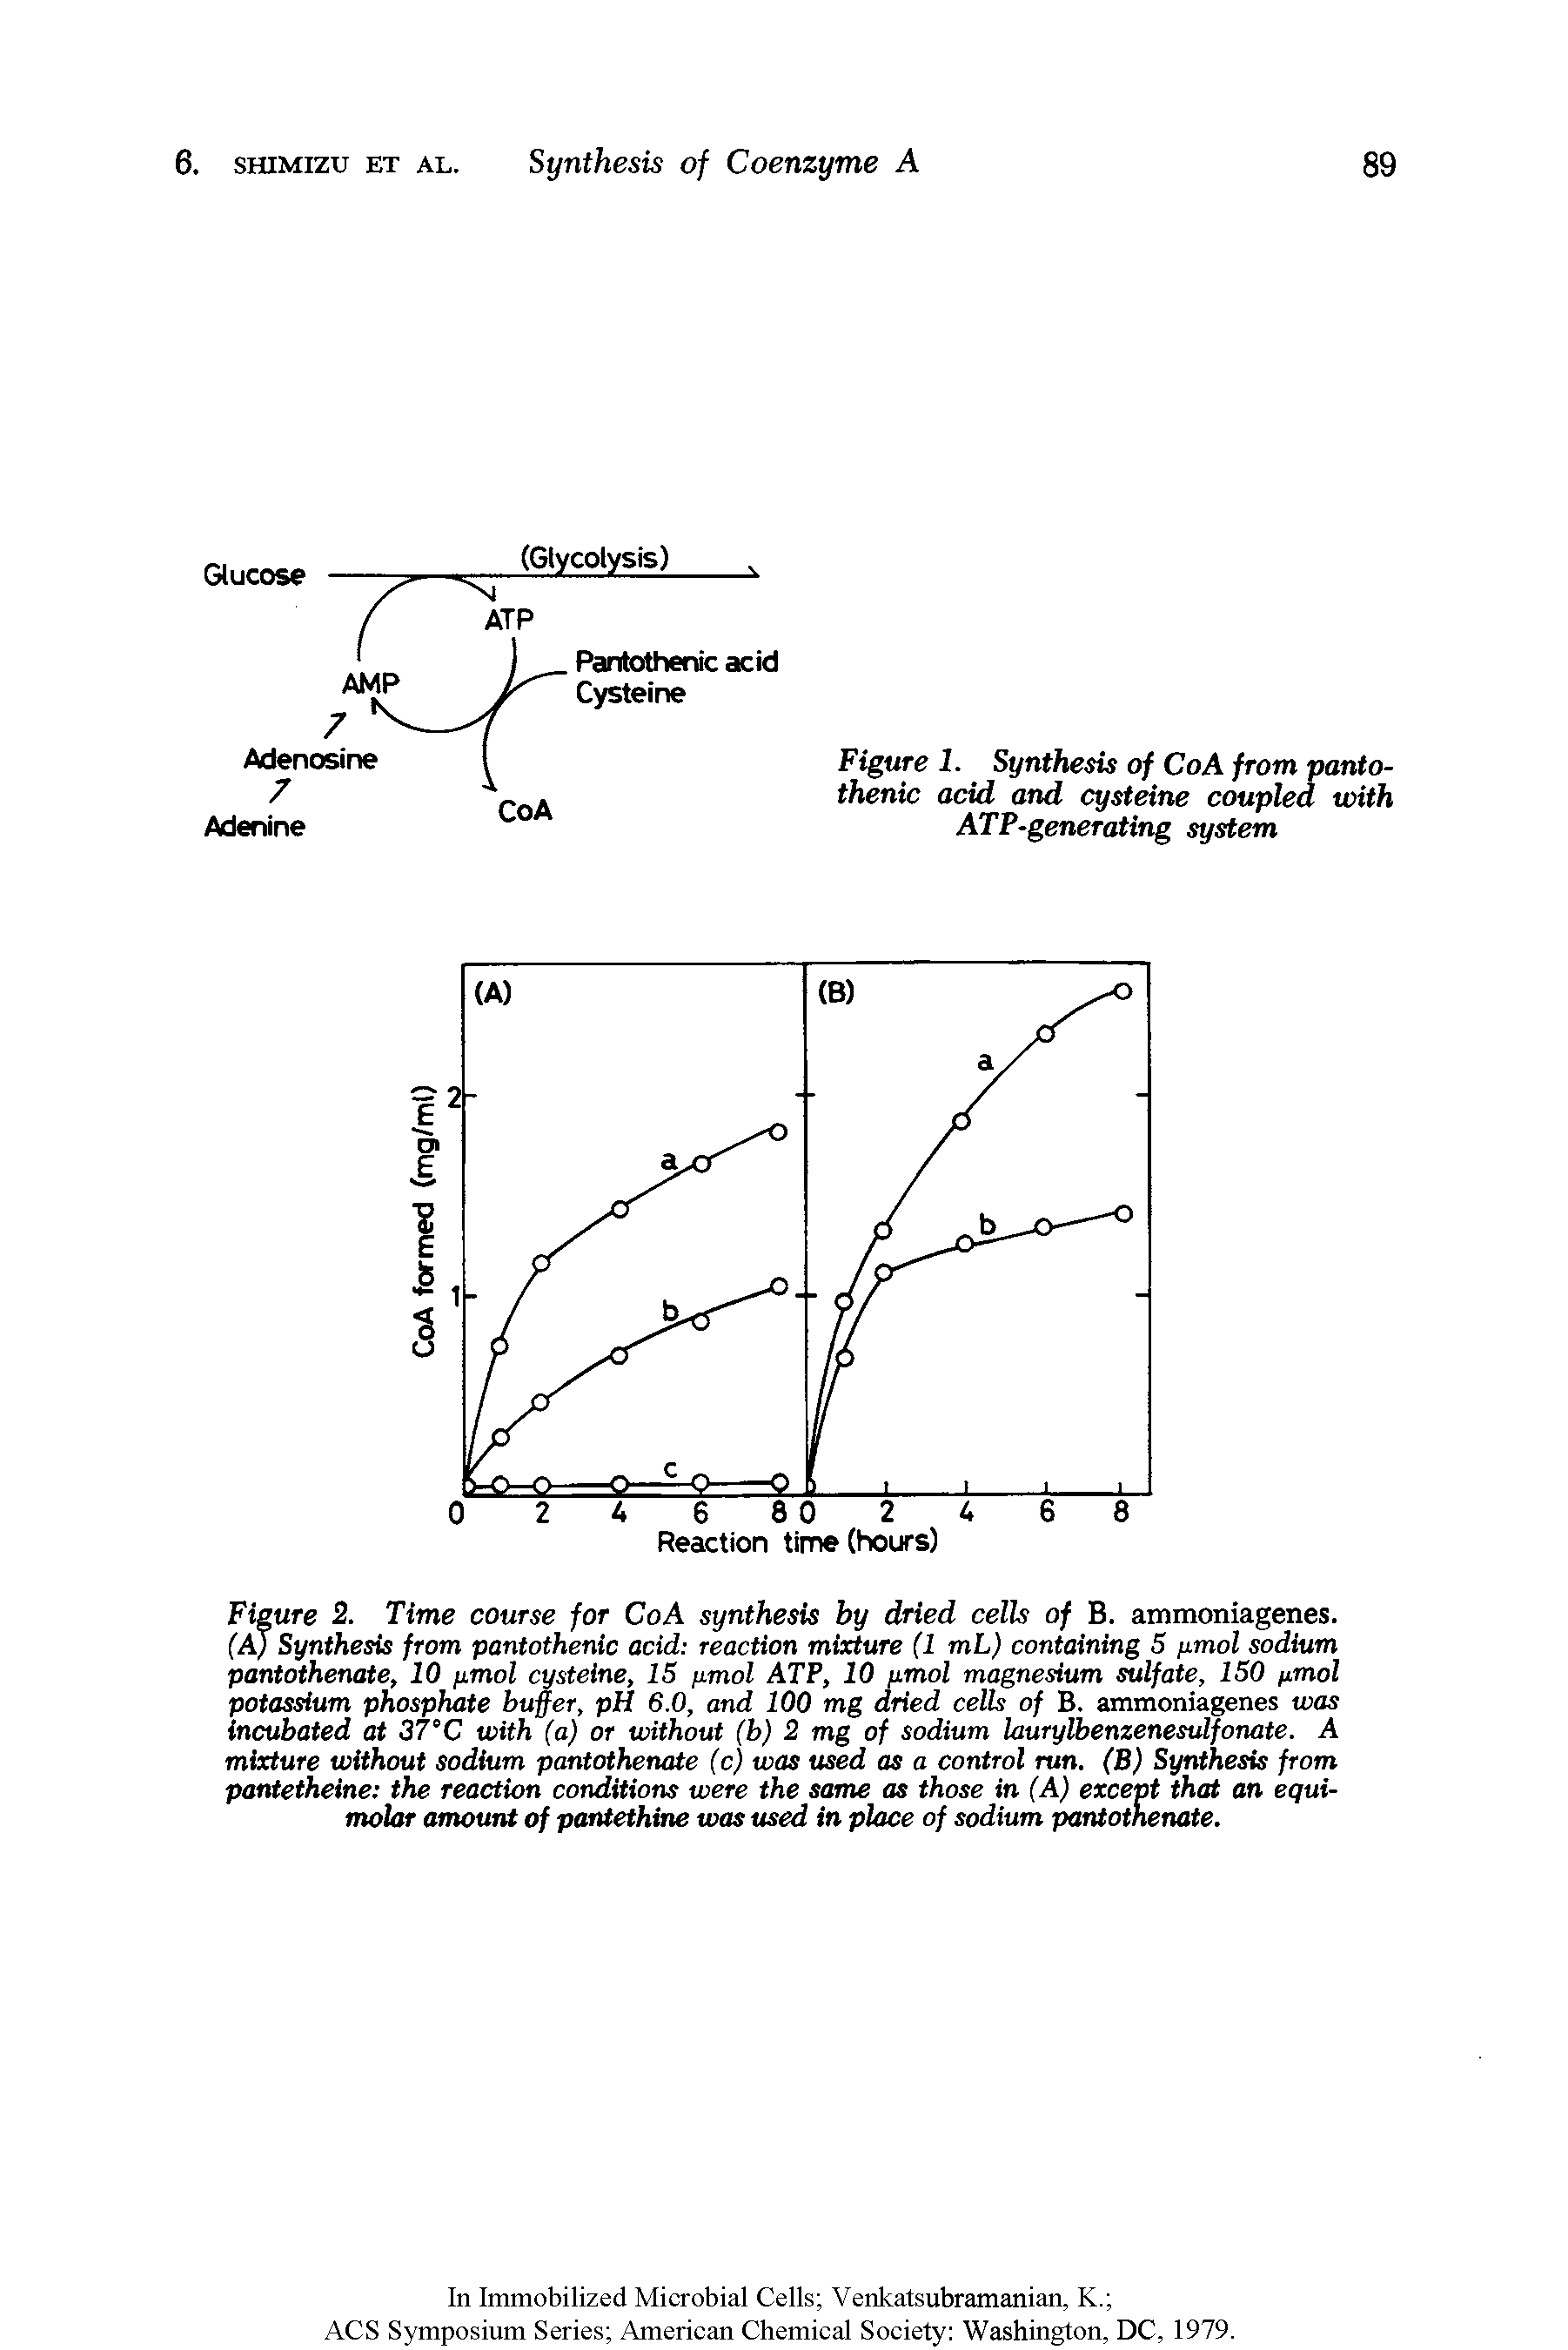 Figure 2. Time course for CoA synthesis by dried cells of B. ammoniagenes. CAJ Synthesis from pantothenic acid reaction mixture (1 mL) containing 5 [imol sodium pantothenate, 10 /imol cysteine, IS /imol ATP, 10 y.mol magnesium sulfate, ISO pmol potassium phosphate buffer, pH 6.0, and 100 mg dried cells of B. ammoniagenes was incubated at 37°C with (a) or without (b) 2 mg of sodium hurylbenzenesulfonate. A mixture without sodium pantothenate (c) was used as a control run. (B) Synthesis from pantetheine the reaction conditiotK were the same as those in (A) except that an equimolar amouni of pantethine was used in place of sodium pantothenate.